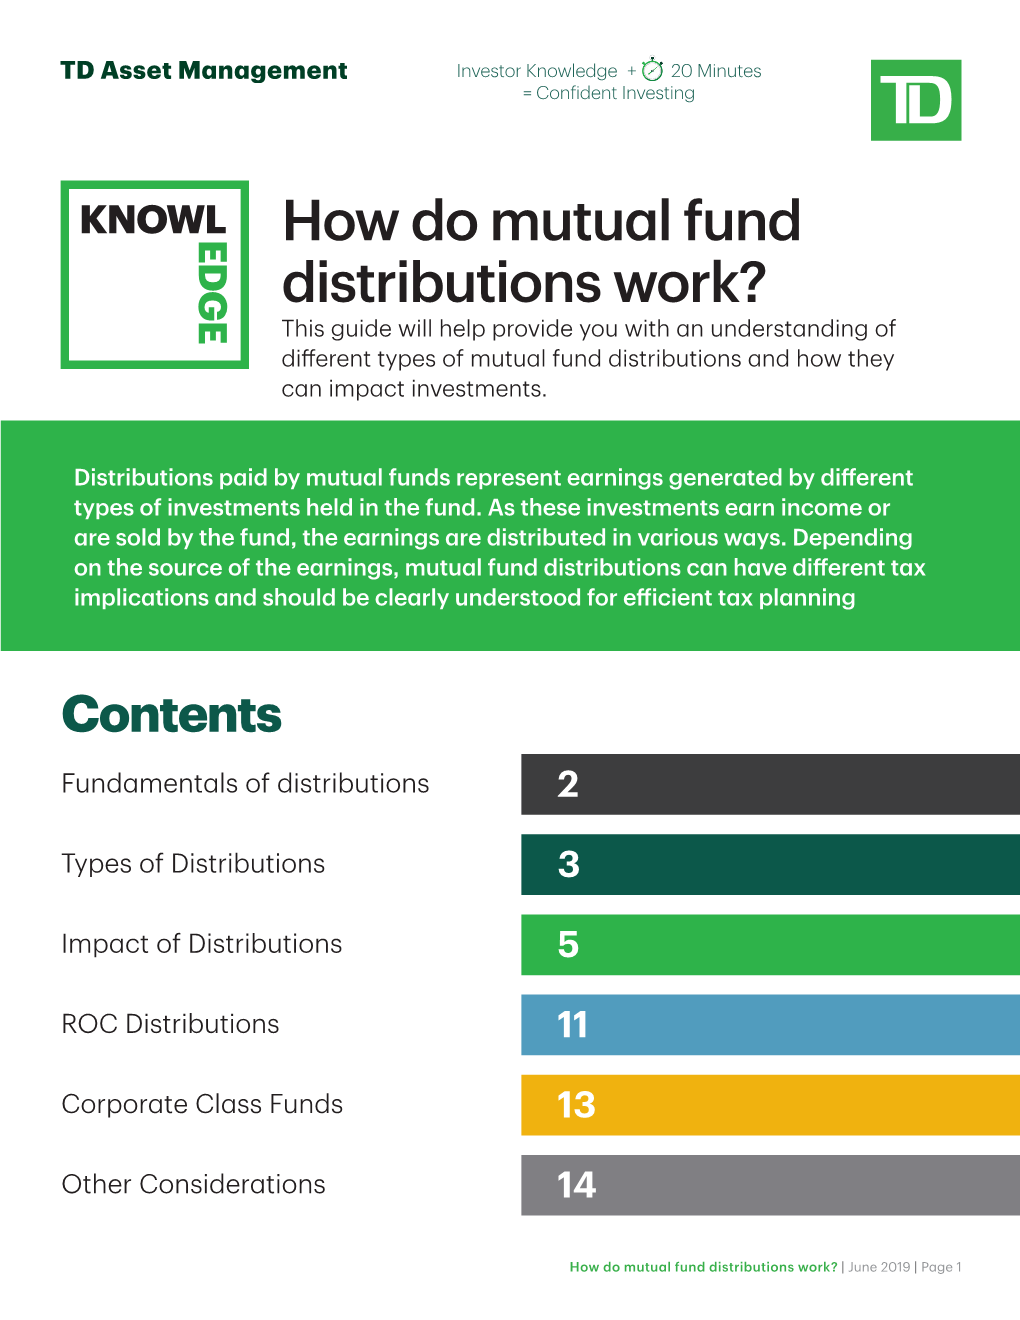 How Do Mutual Fund Distributions Work?